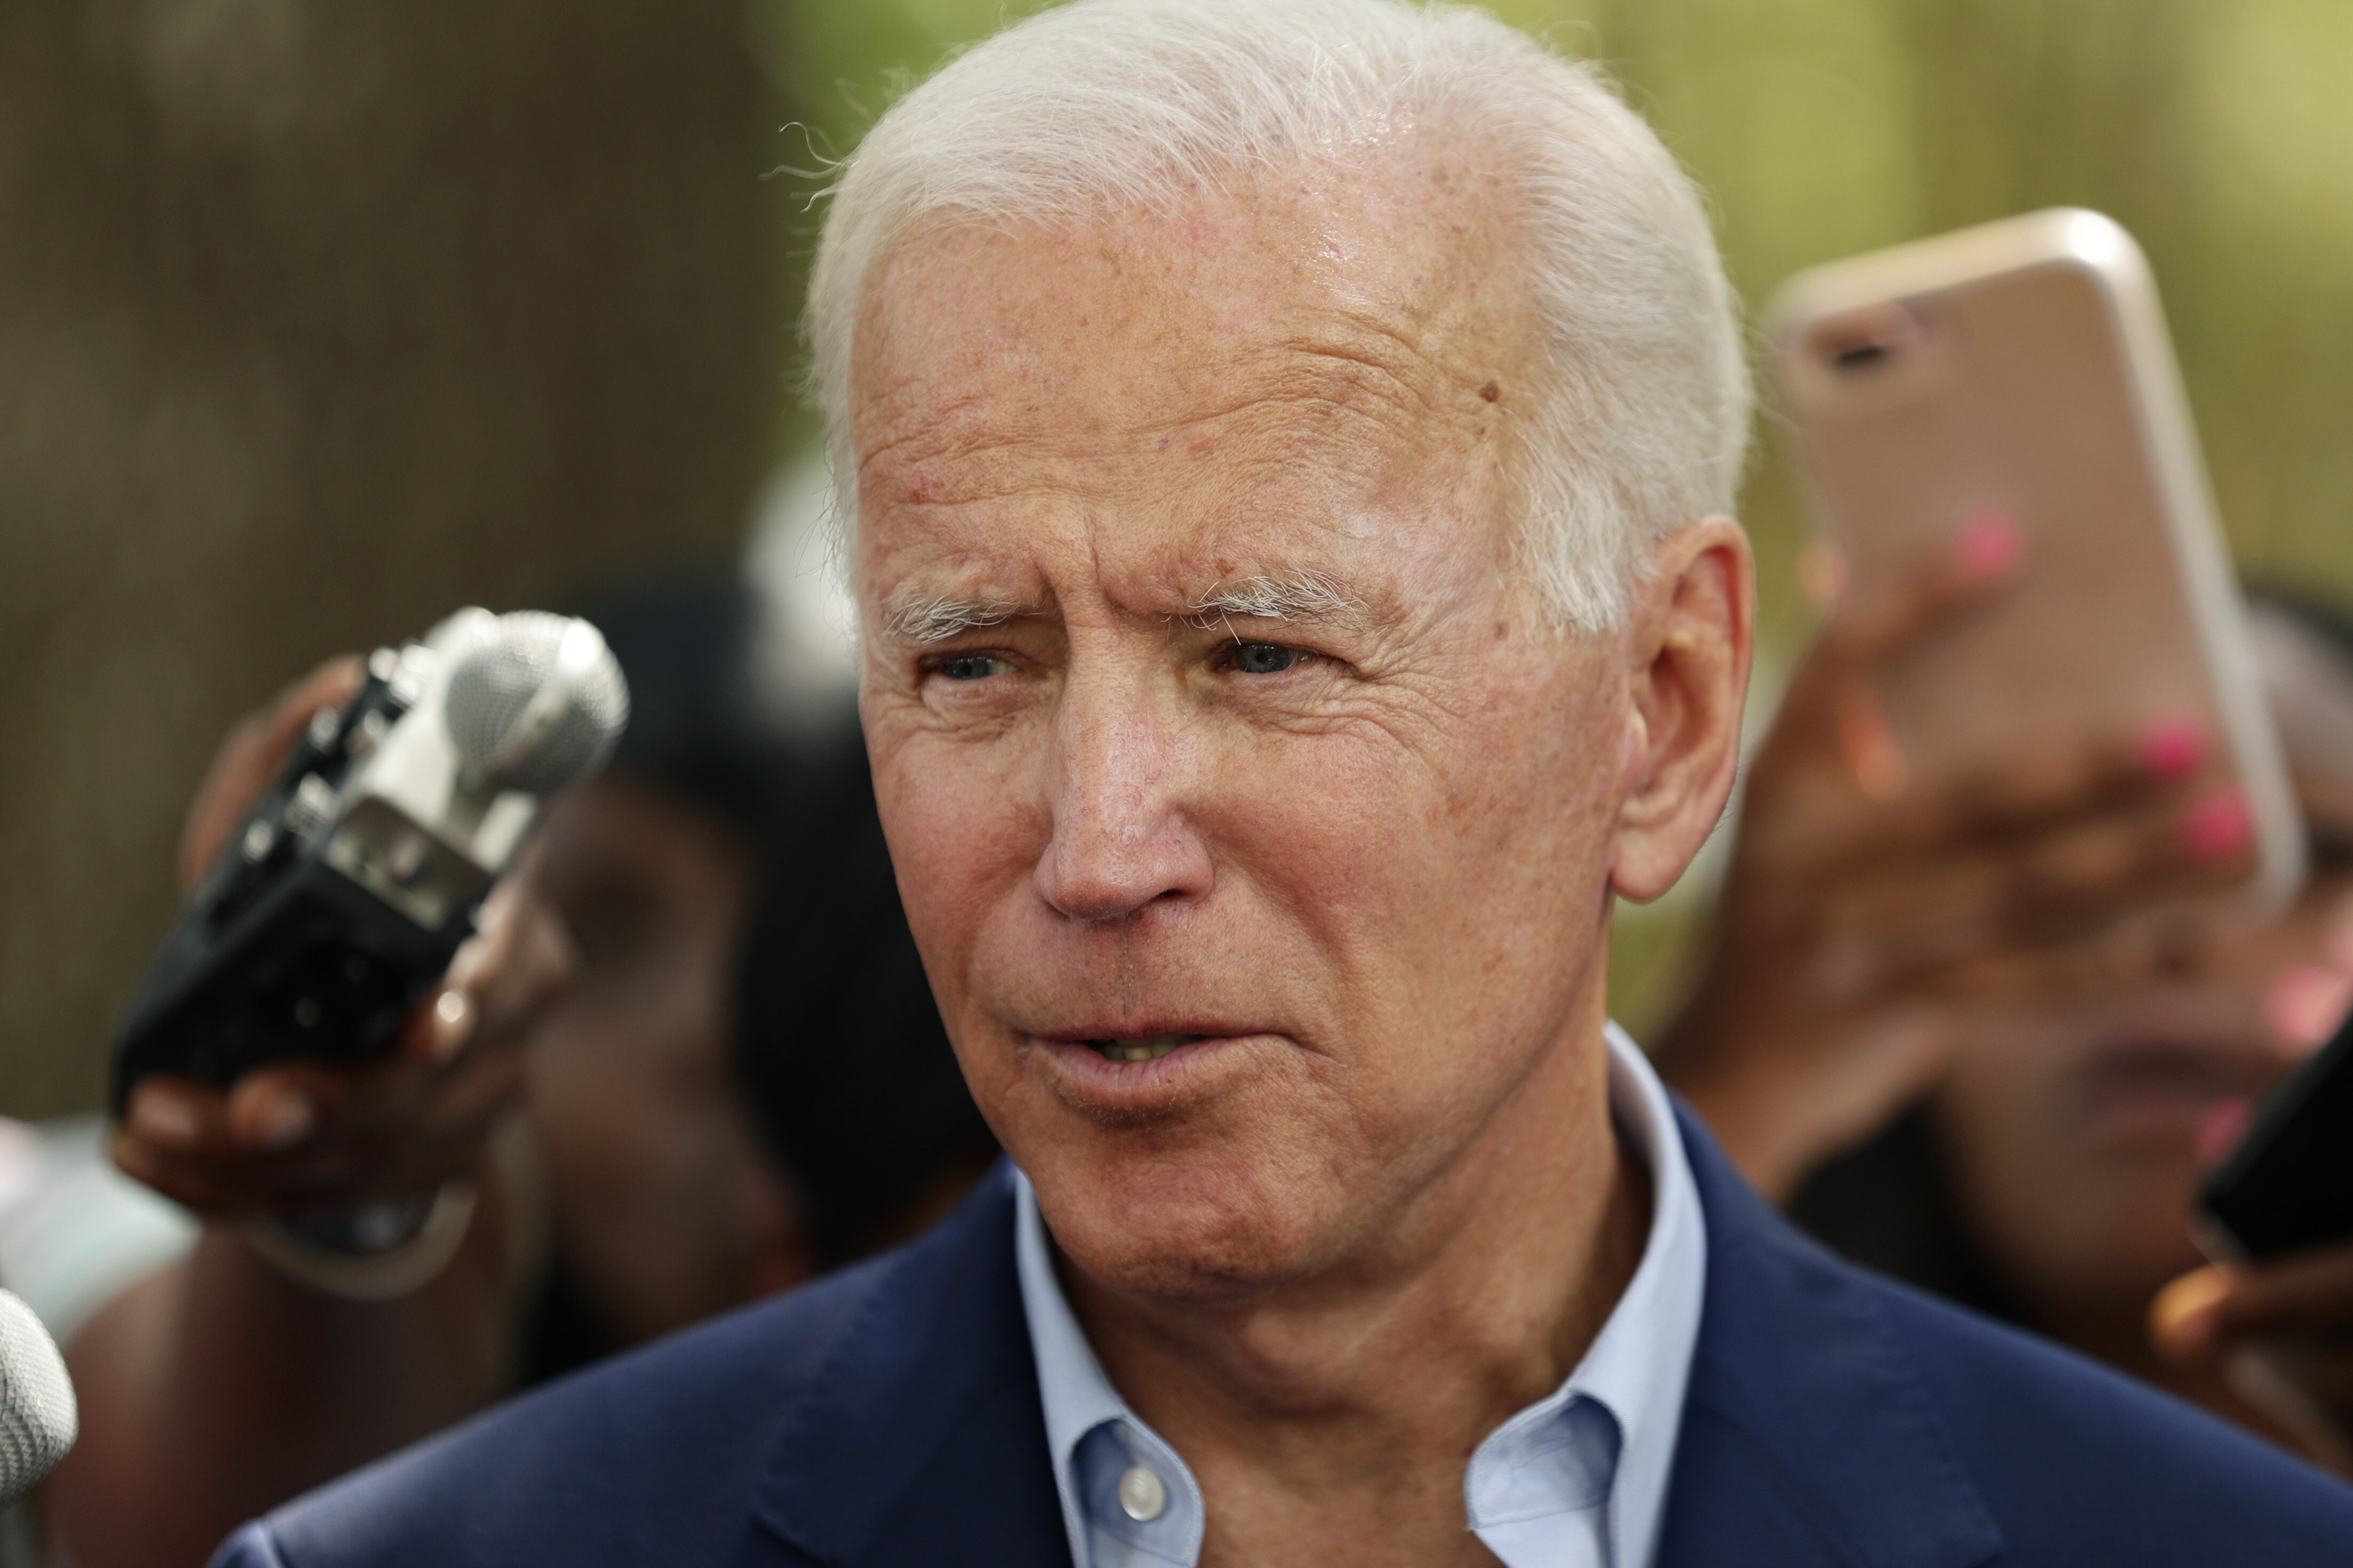 Twitter Erupts Over Challenge To Biden Story That He Faced Down Armed Gang Leader